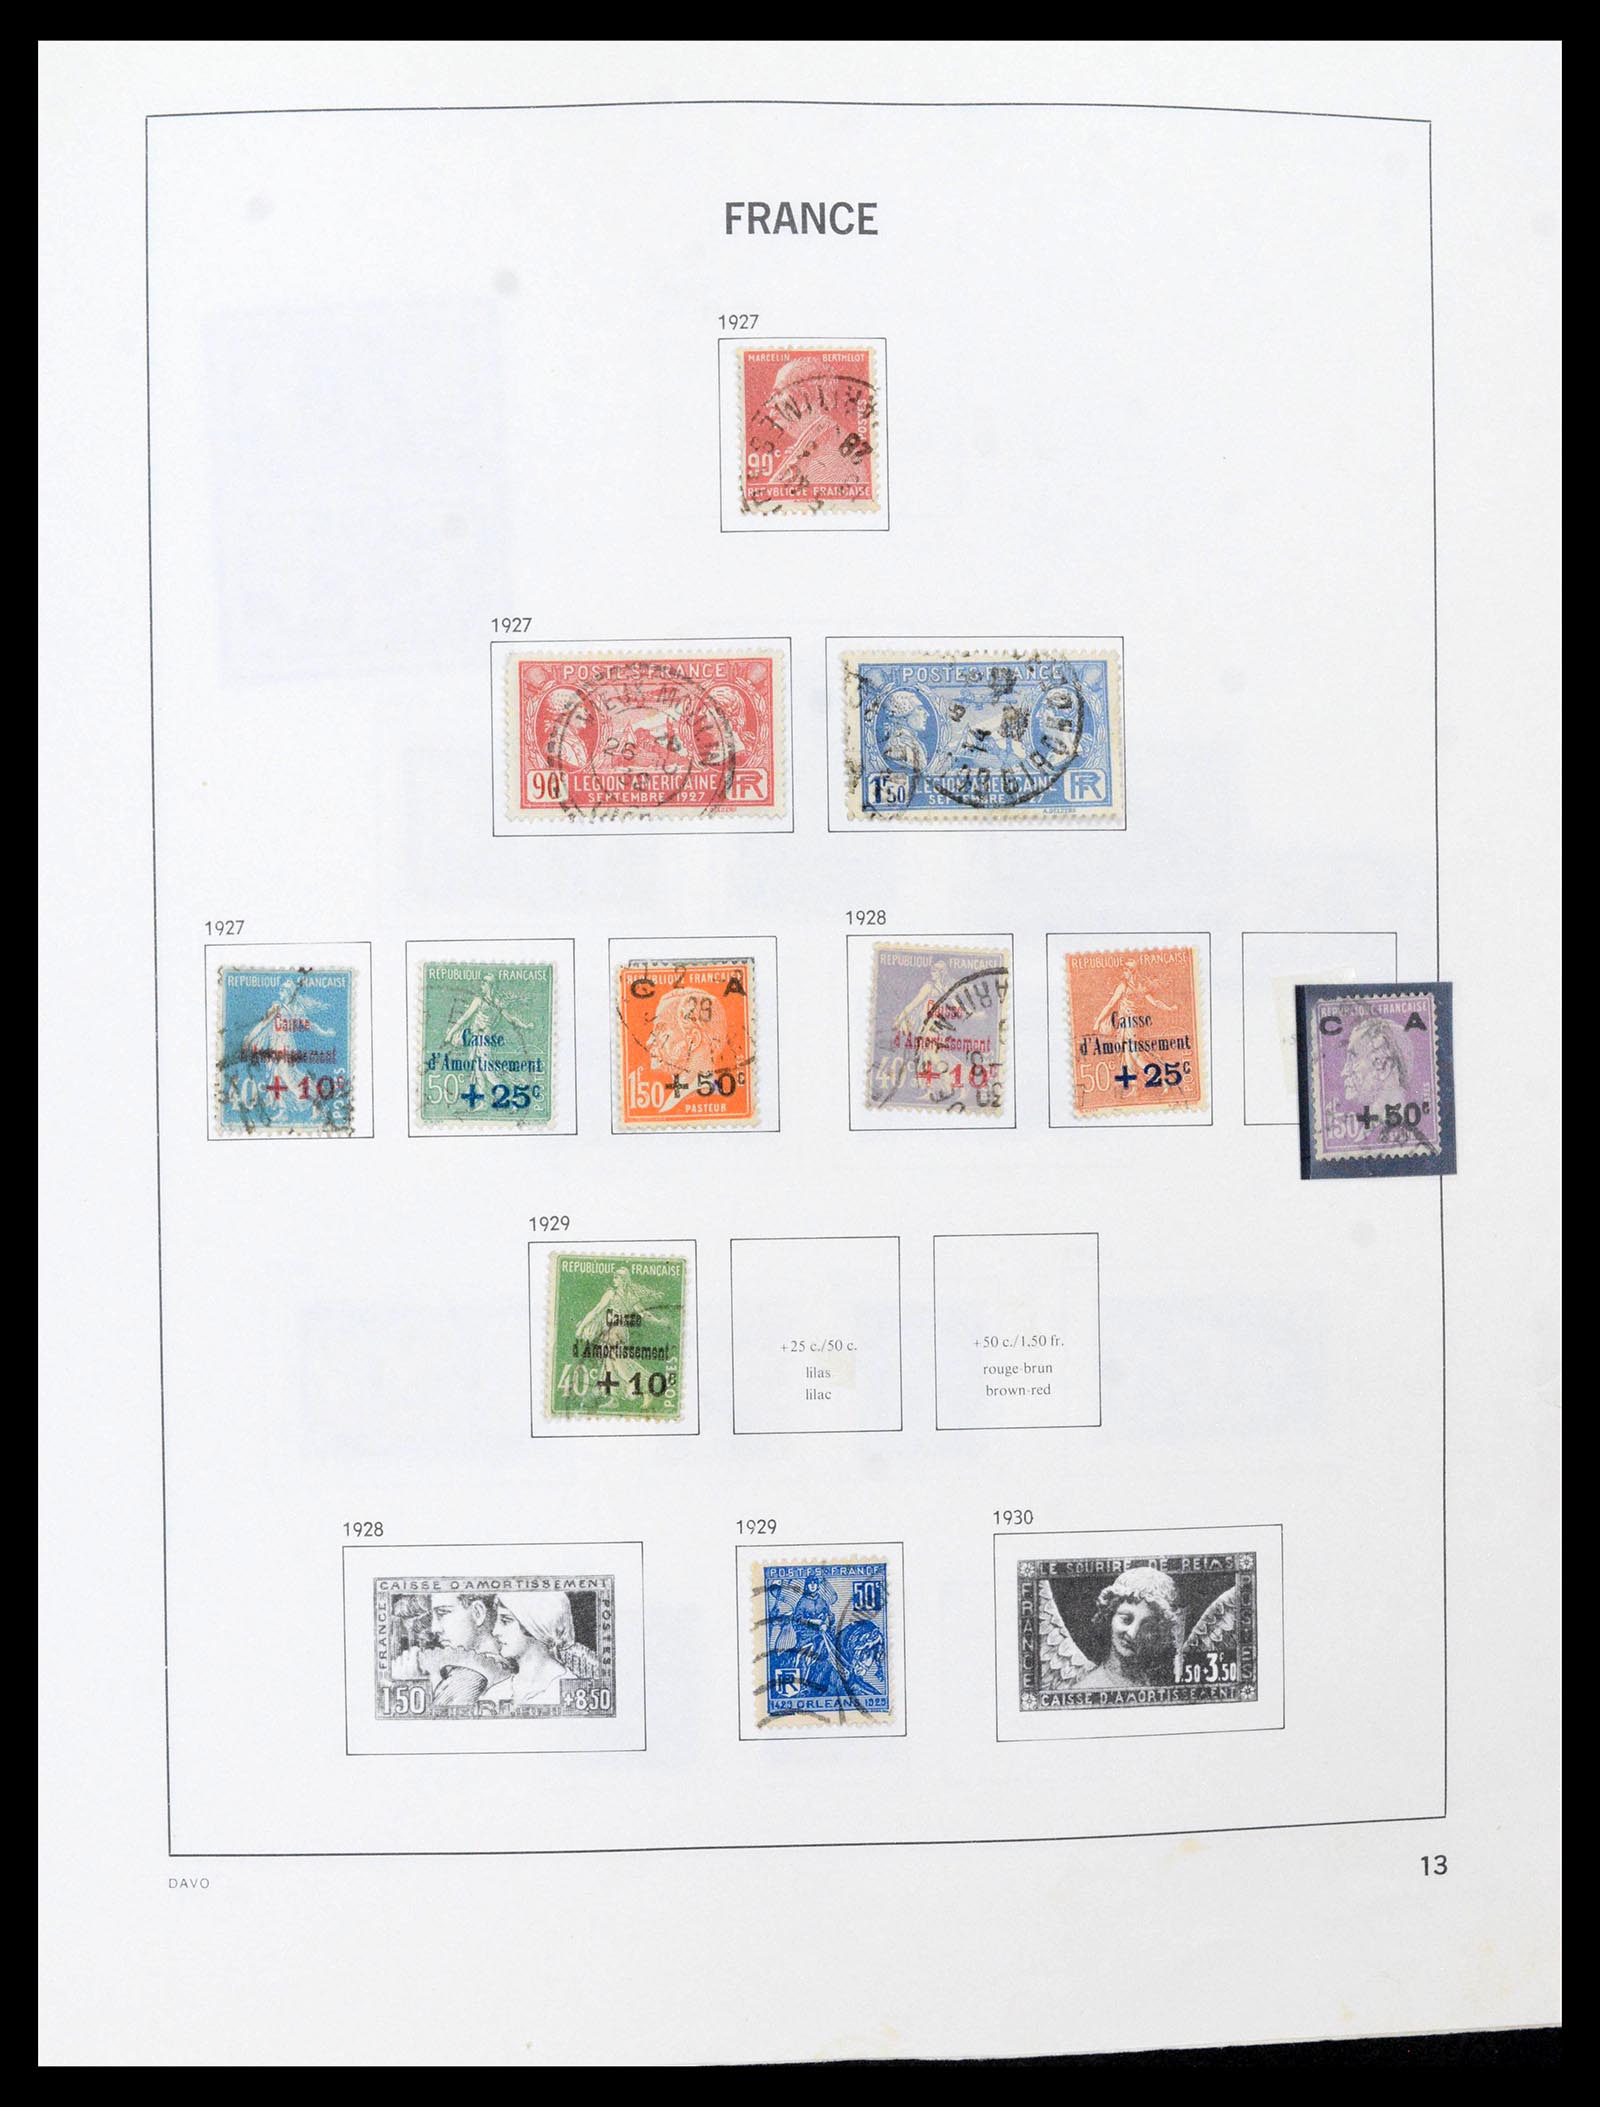 39164 0013 - Stamp collection 39164 France 1849-1981.